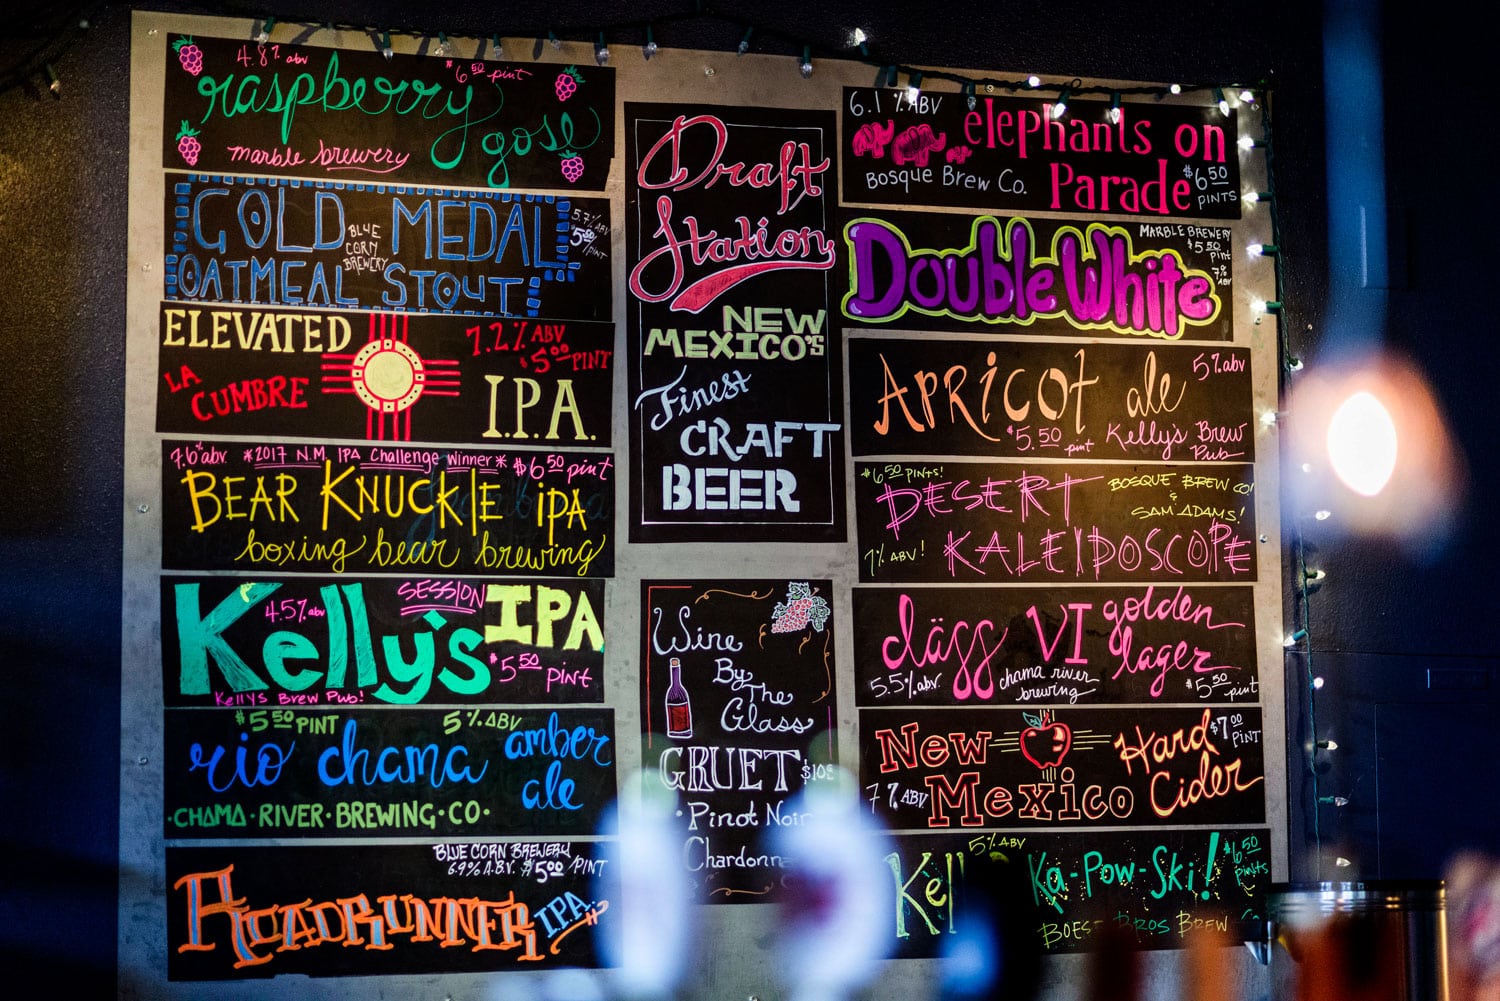 Colorful Brewhouse beer menu. Displaying many of the local beers and brewers.